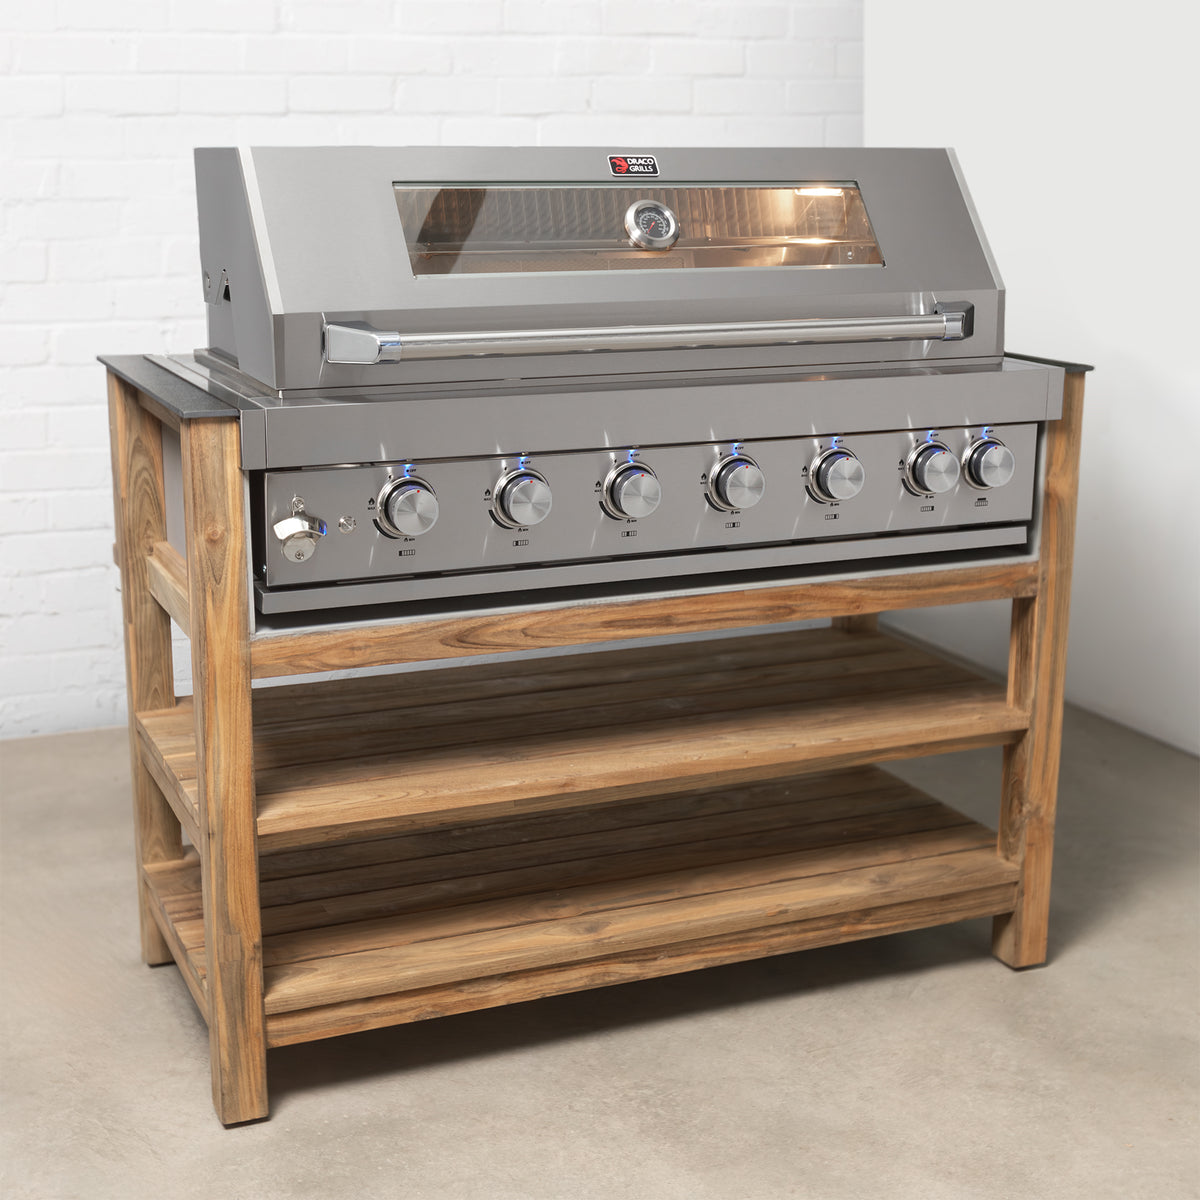 Draco Grills Teak 6 Burner Outdoor Kitchen with Modular Single Cupboard and Wine Cabinet